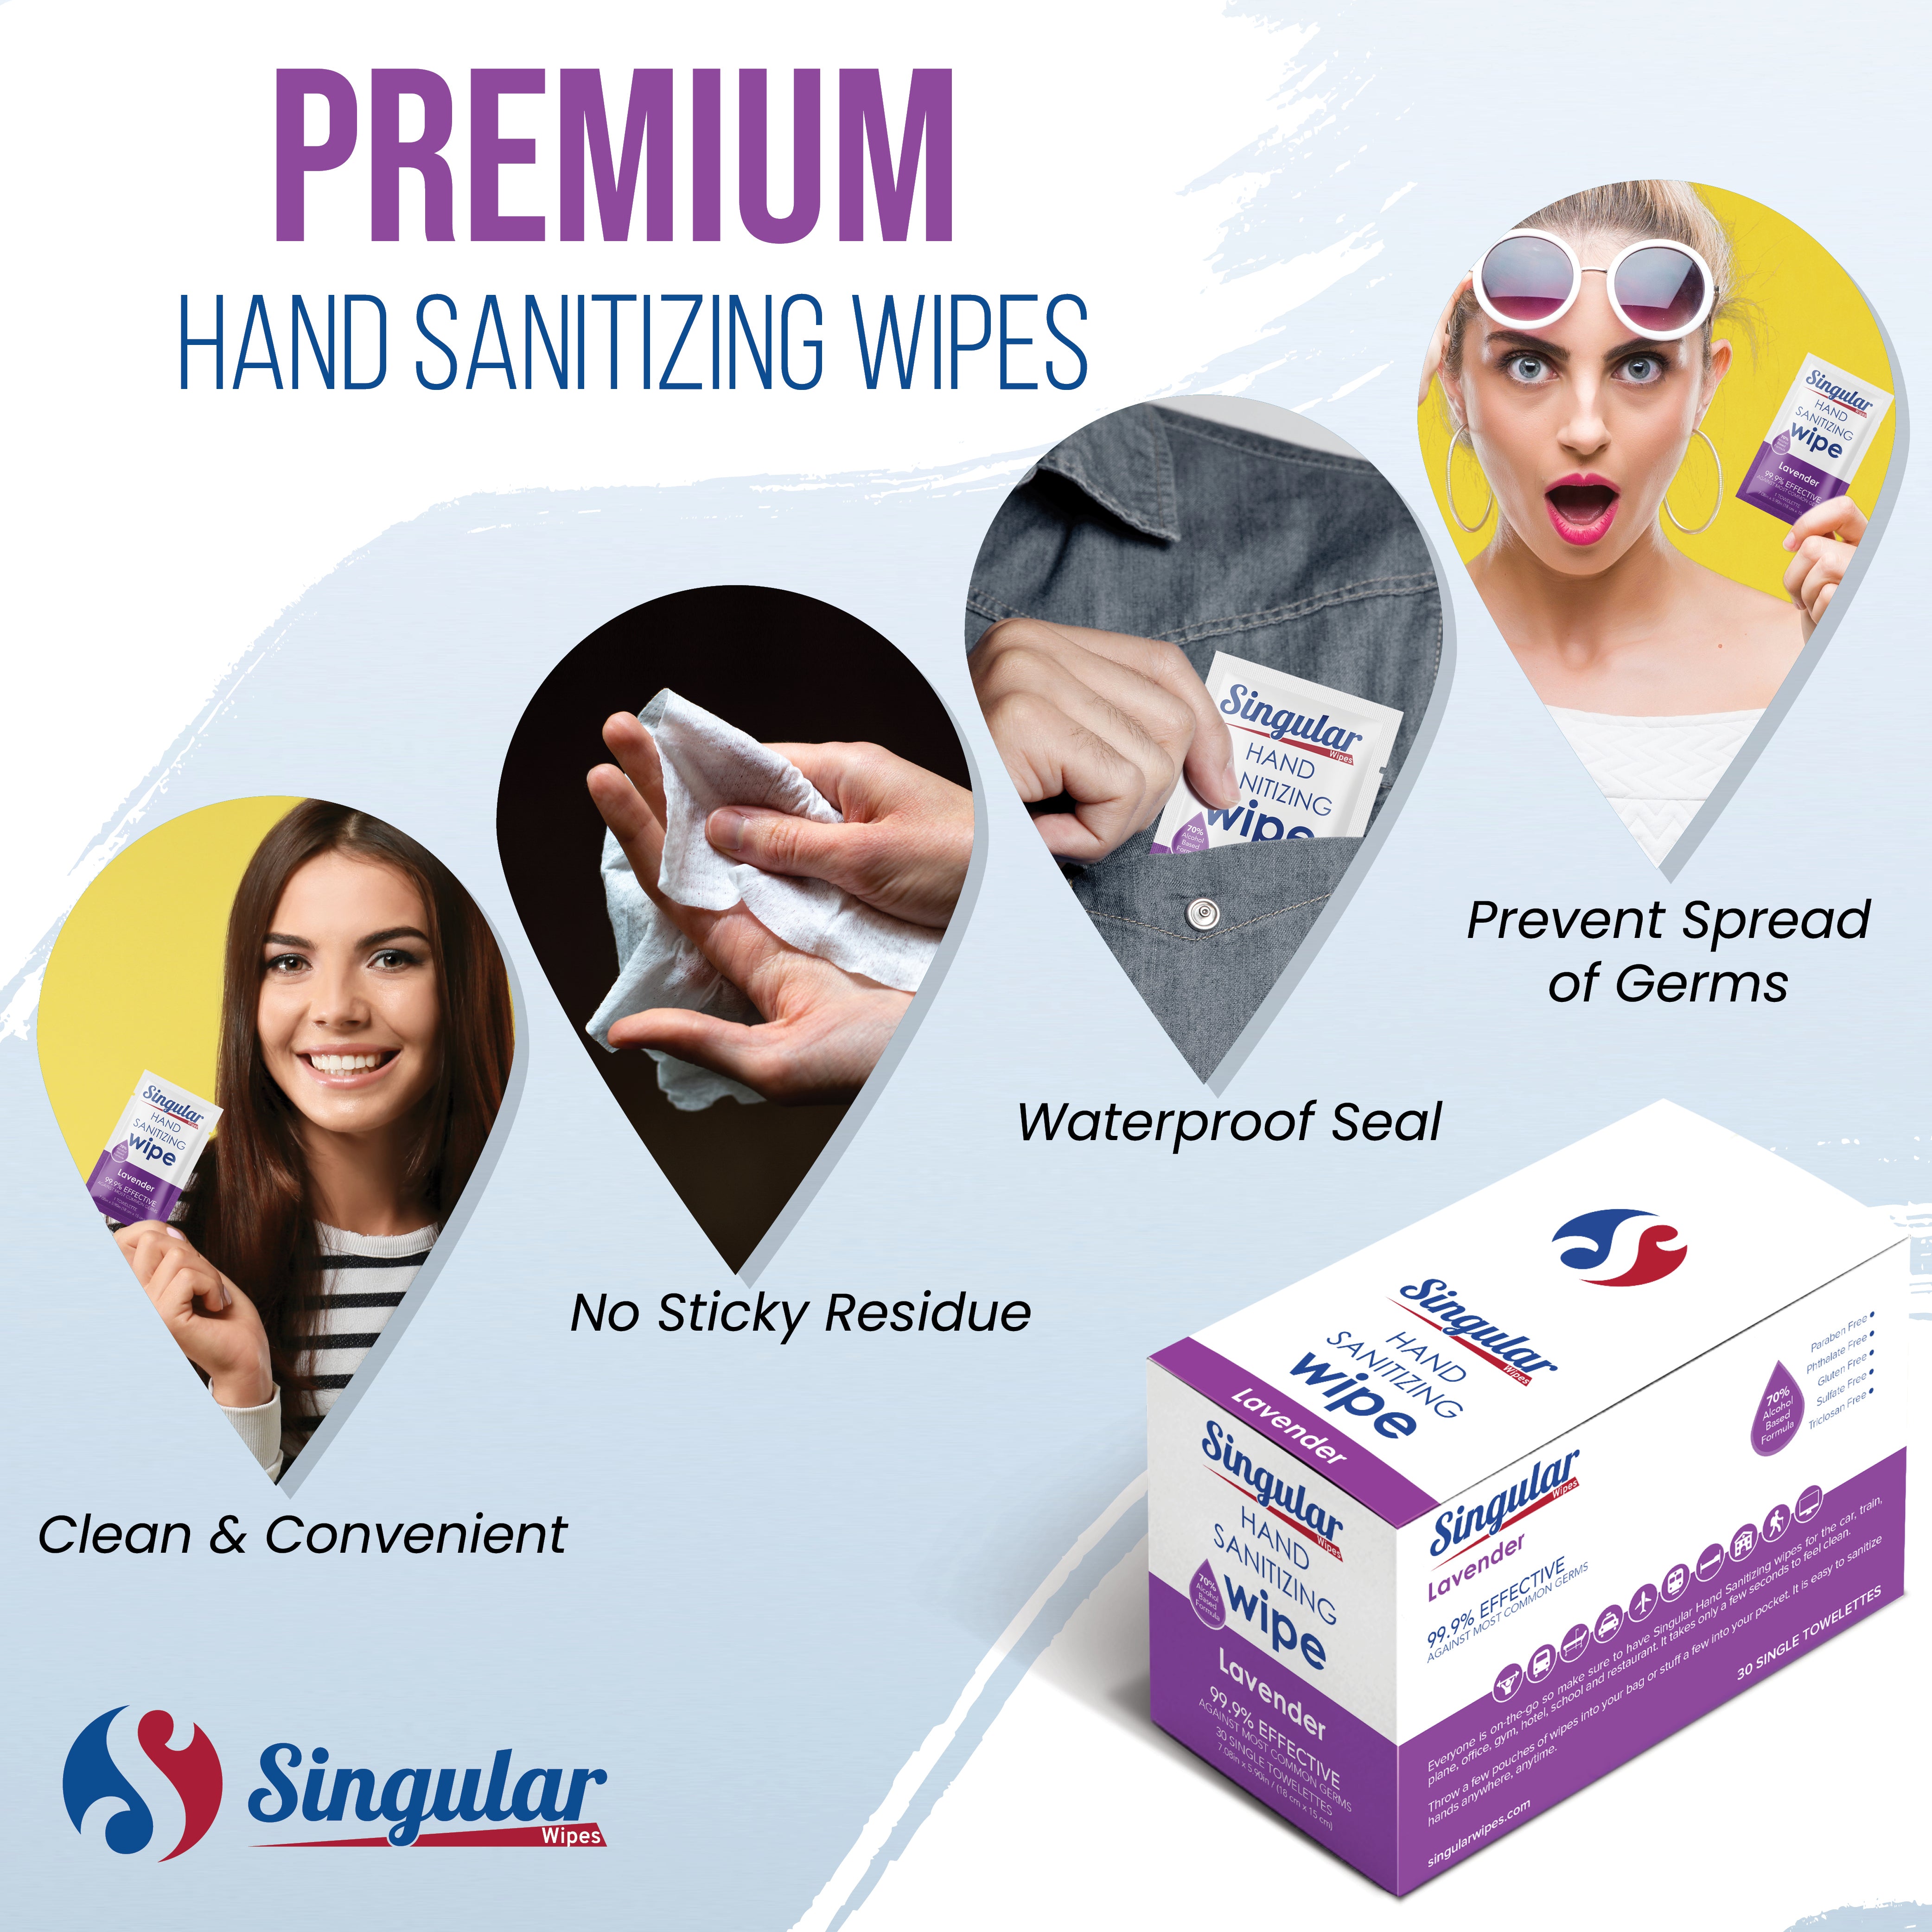 HAND SANITIZING WIPES - Individually Packed Premium Hand Sanitizing Wipes for Travel, Home, Office, School, etc. with Fragrance and Moisturizer - Made in USA (Lavender 30ct Box)